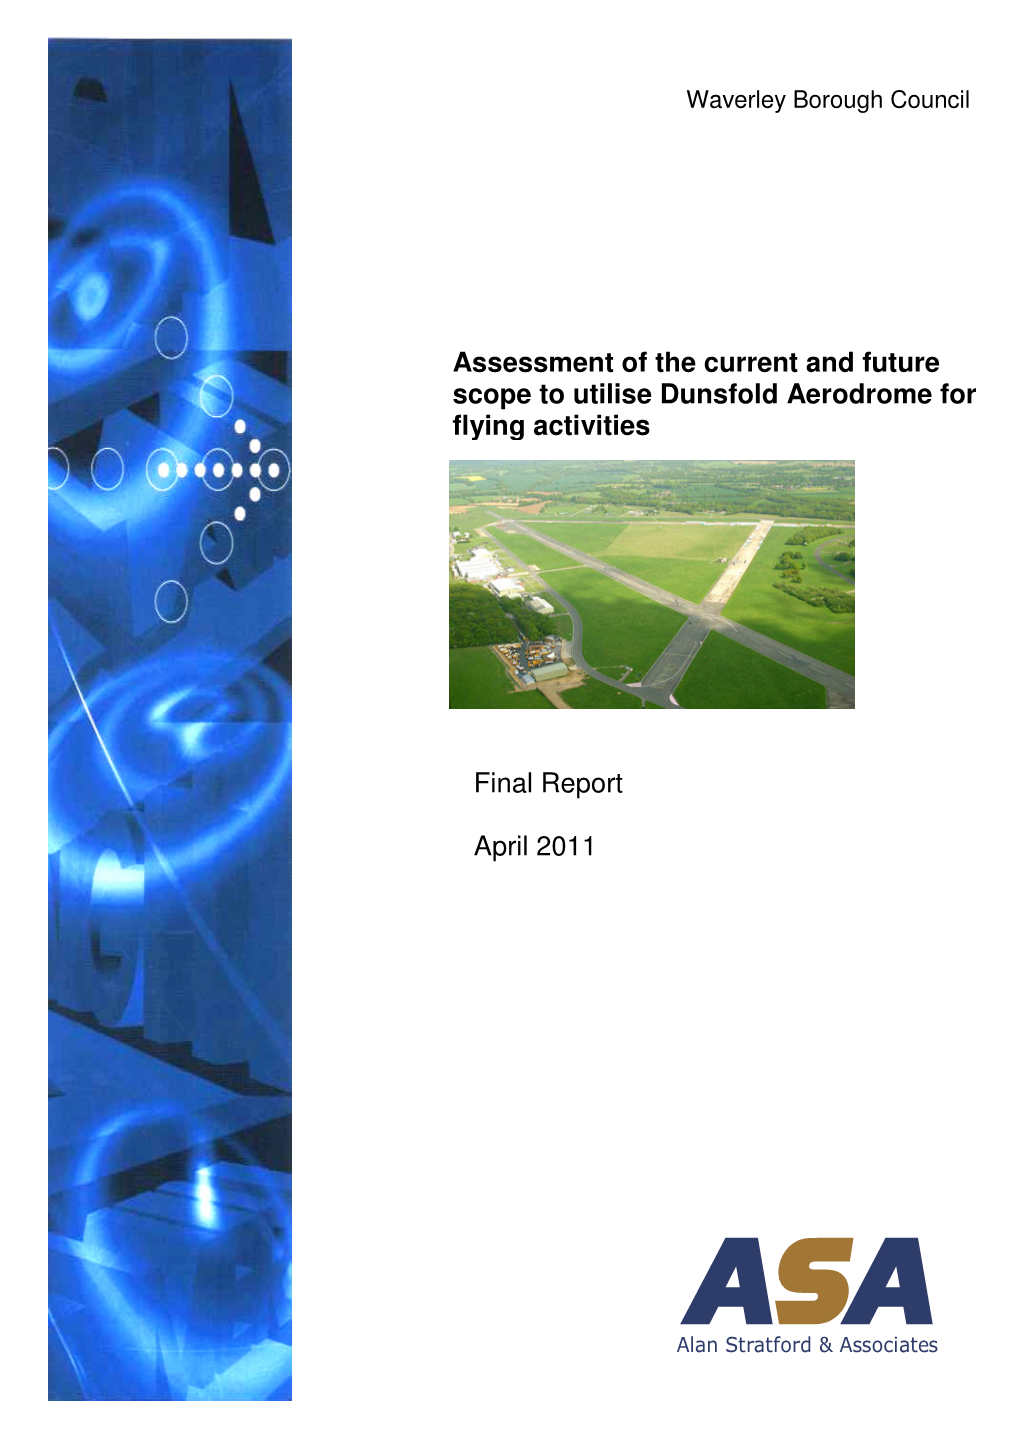 Ltd Assessment of the Current and Future Scope to Utilise Dunsfold